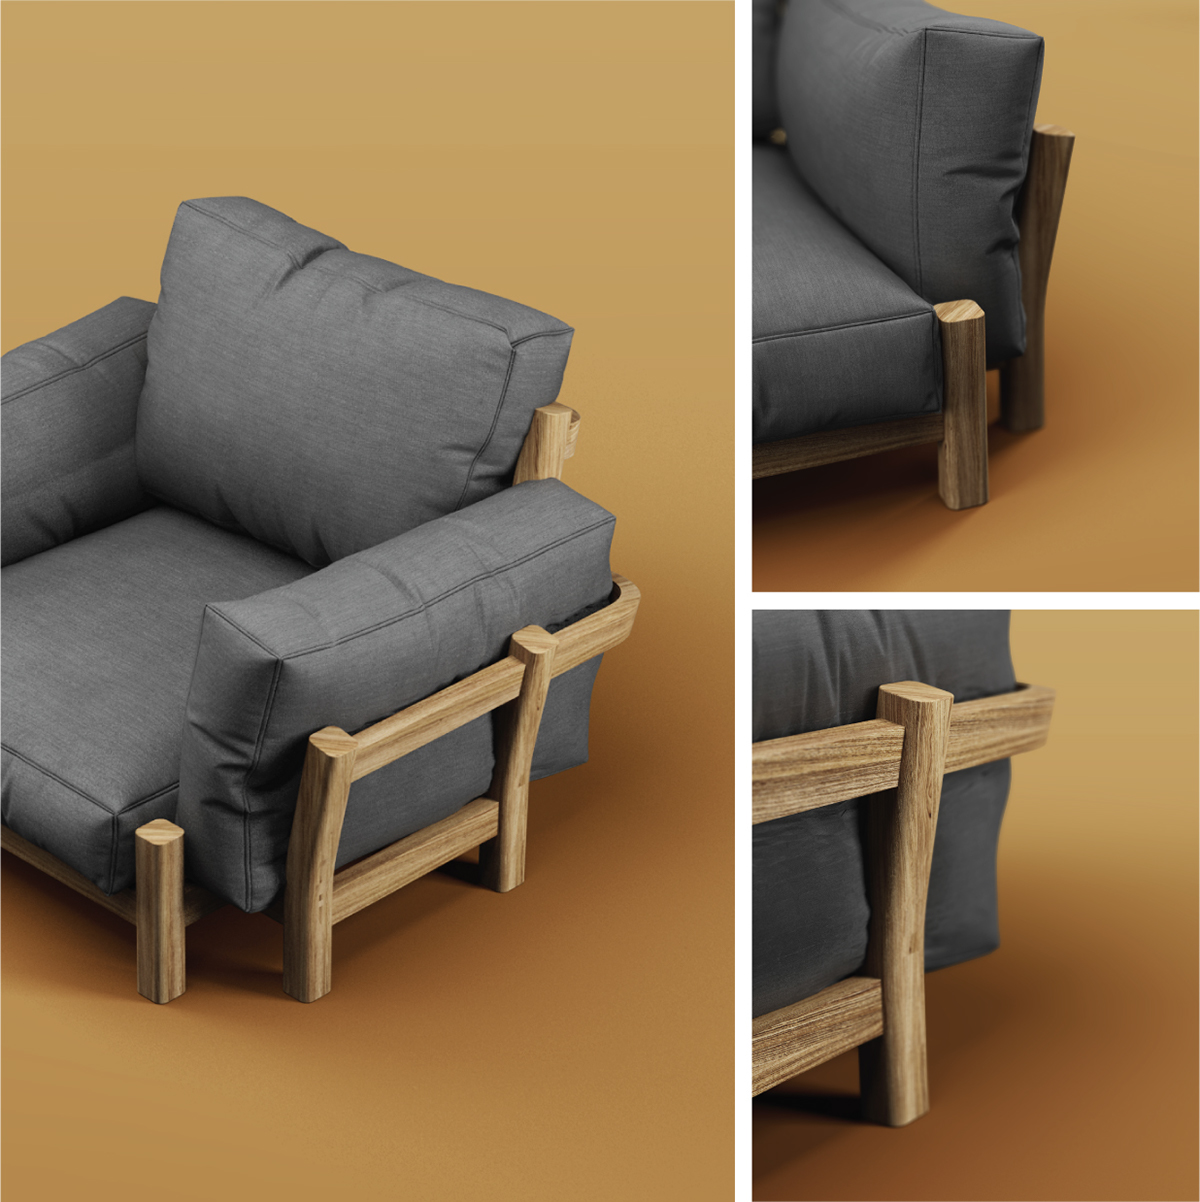 furniture japan fence sofa Couch wood simple double triple armchair banquette seat mimimalist slick Montreal